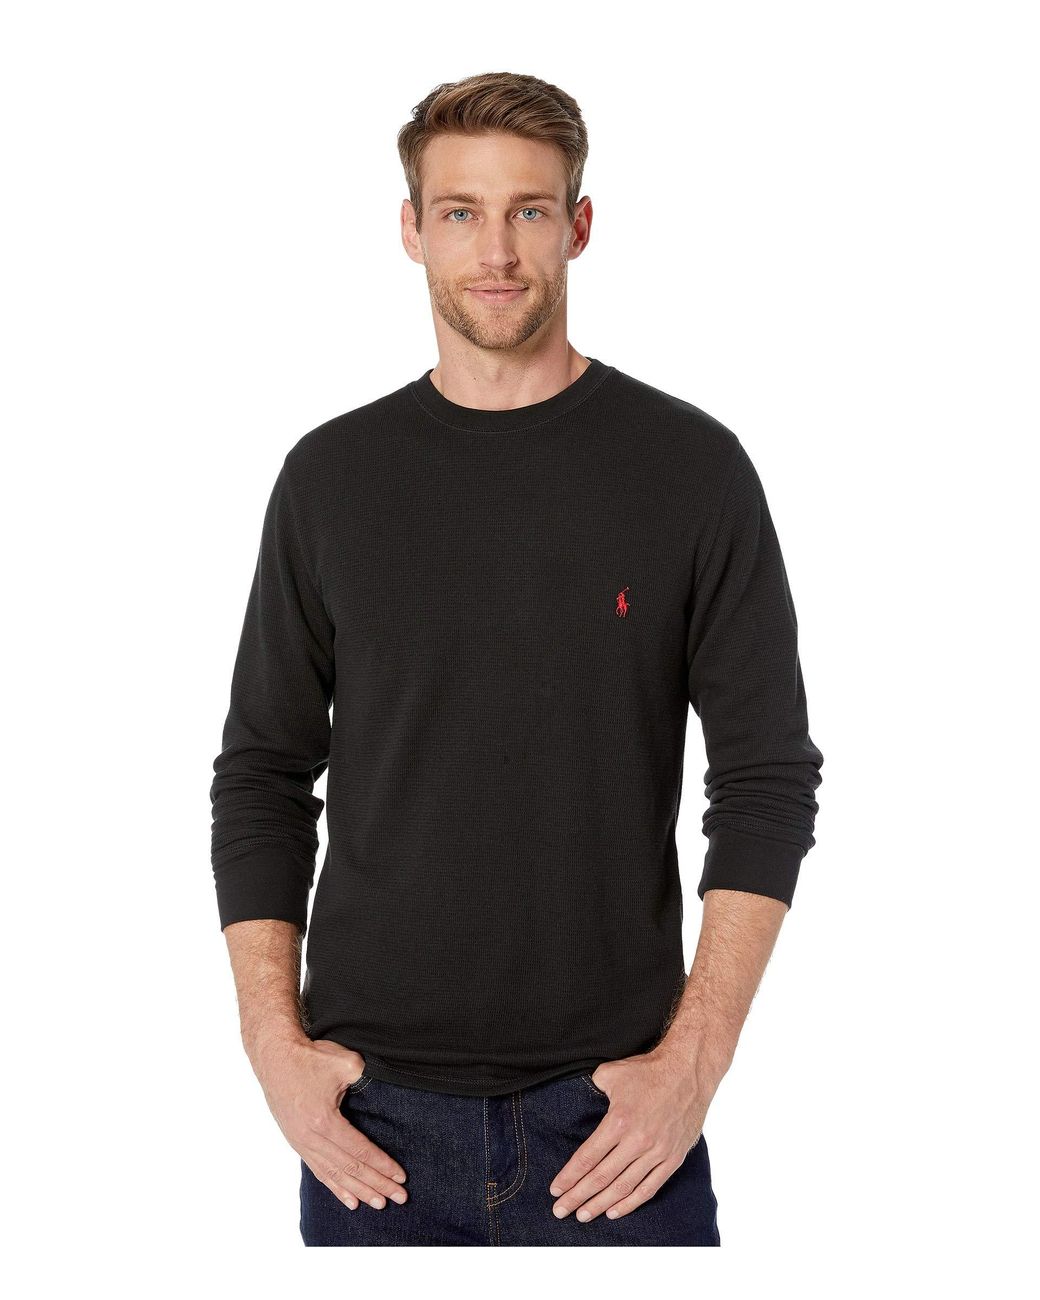 Polo Ralph Lauren Cotton Waffle Long Sleeve Crew in Black for Men - Lyst